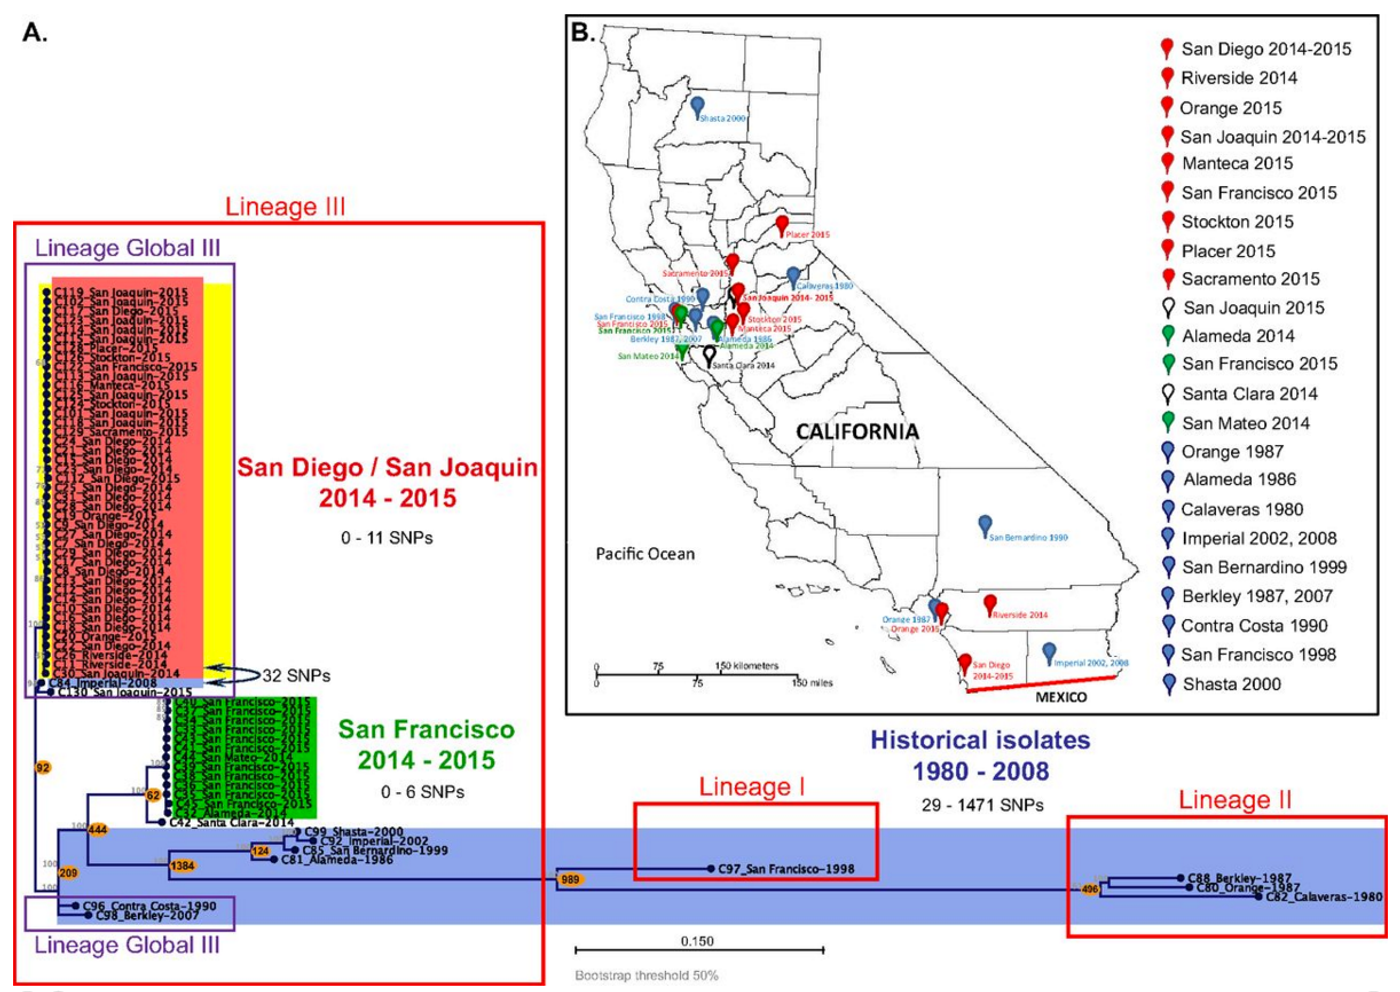 Local and global phylogeny of CA genome-wide hqSNP differences between STX1-producing S. sonnei isolates from the San Diego and San Joaquin outbreak, STX-negative S. sonnei isolates from the San Francisco outbreak, and historical isolates from California. Isolates from the San Diego/San Joaquin (SDi/SJo) outbreak (red), isolates from the San Francisco (SFr) outbreak (green), historical isolates (blue), and STX-positive isolates (yellow) are indicated by background colors. / Credit: mSphere Kozyreva et al 2016